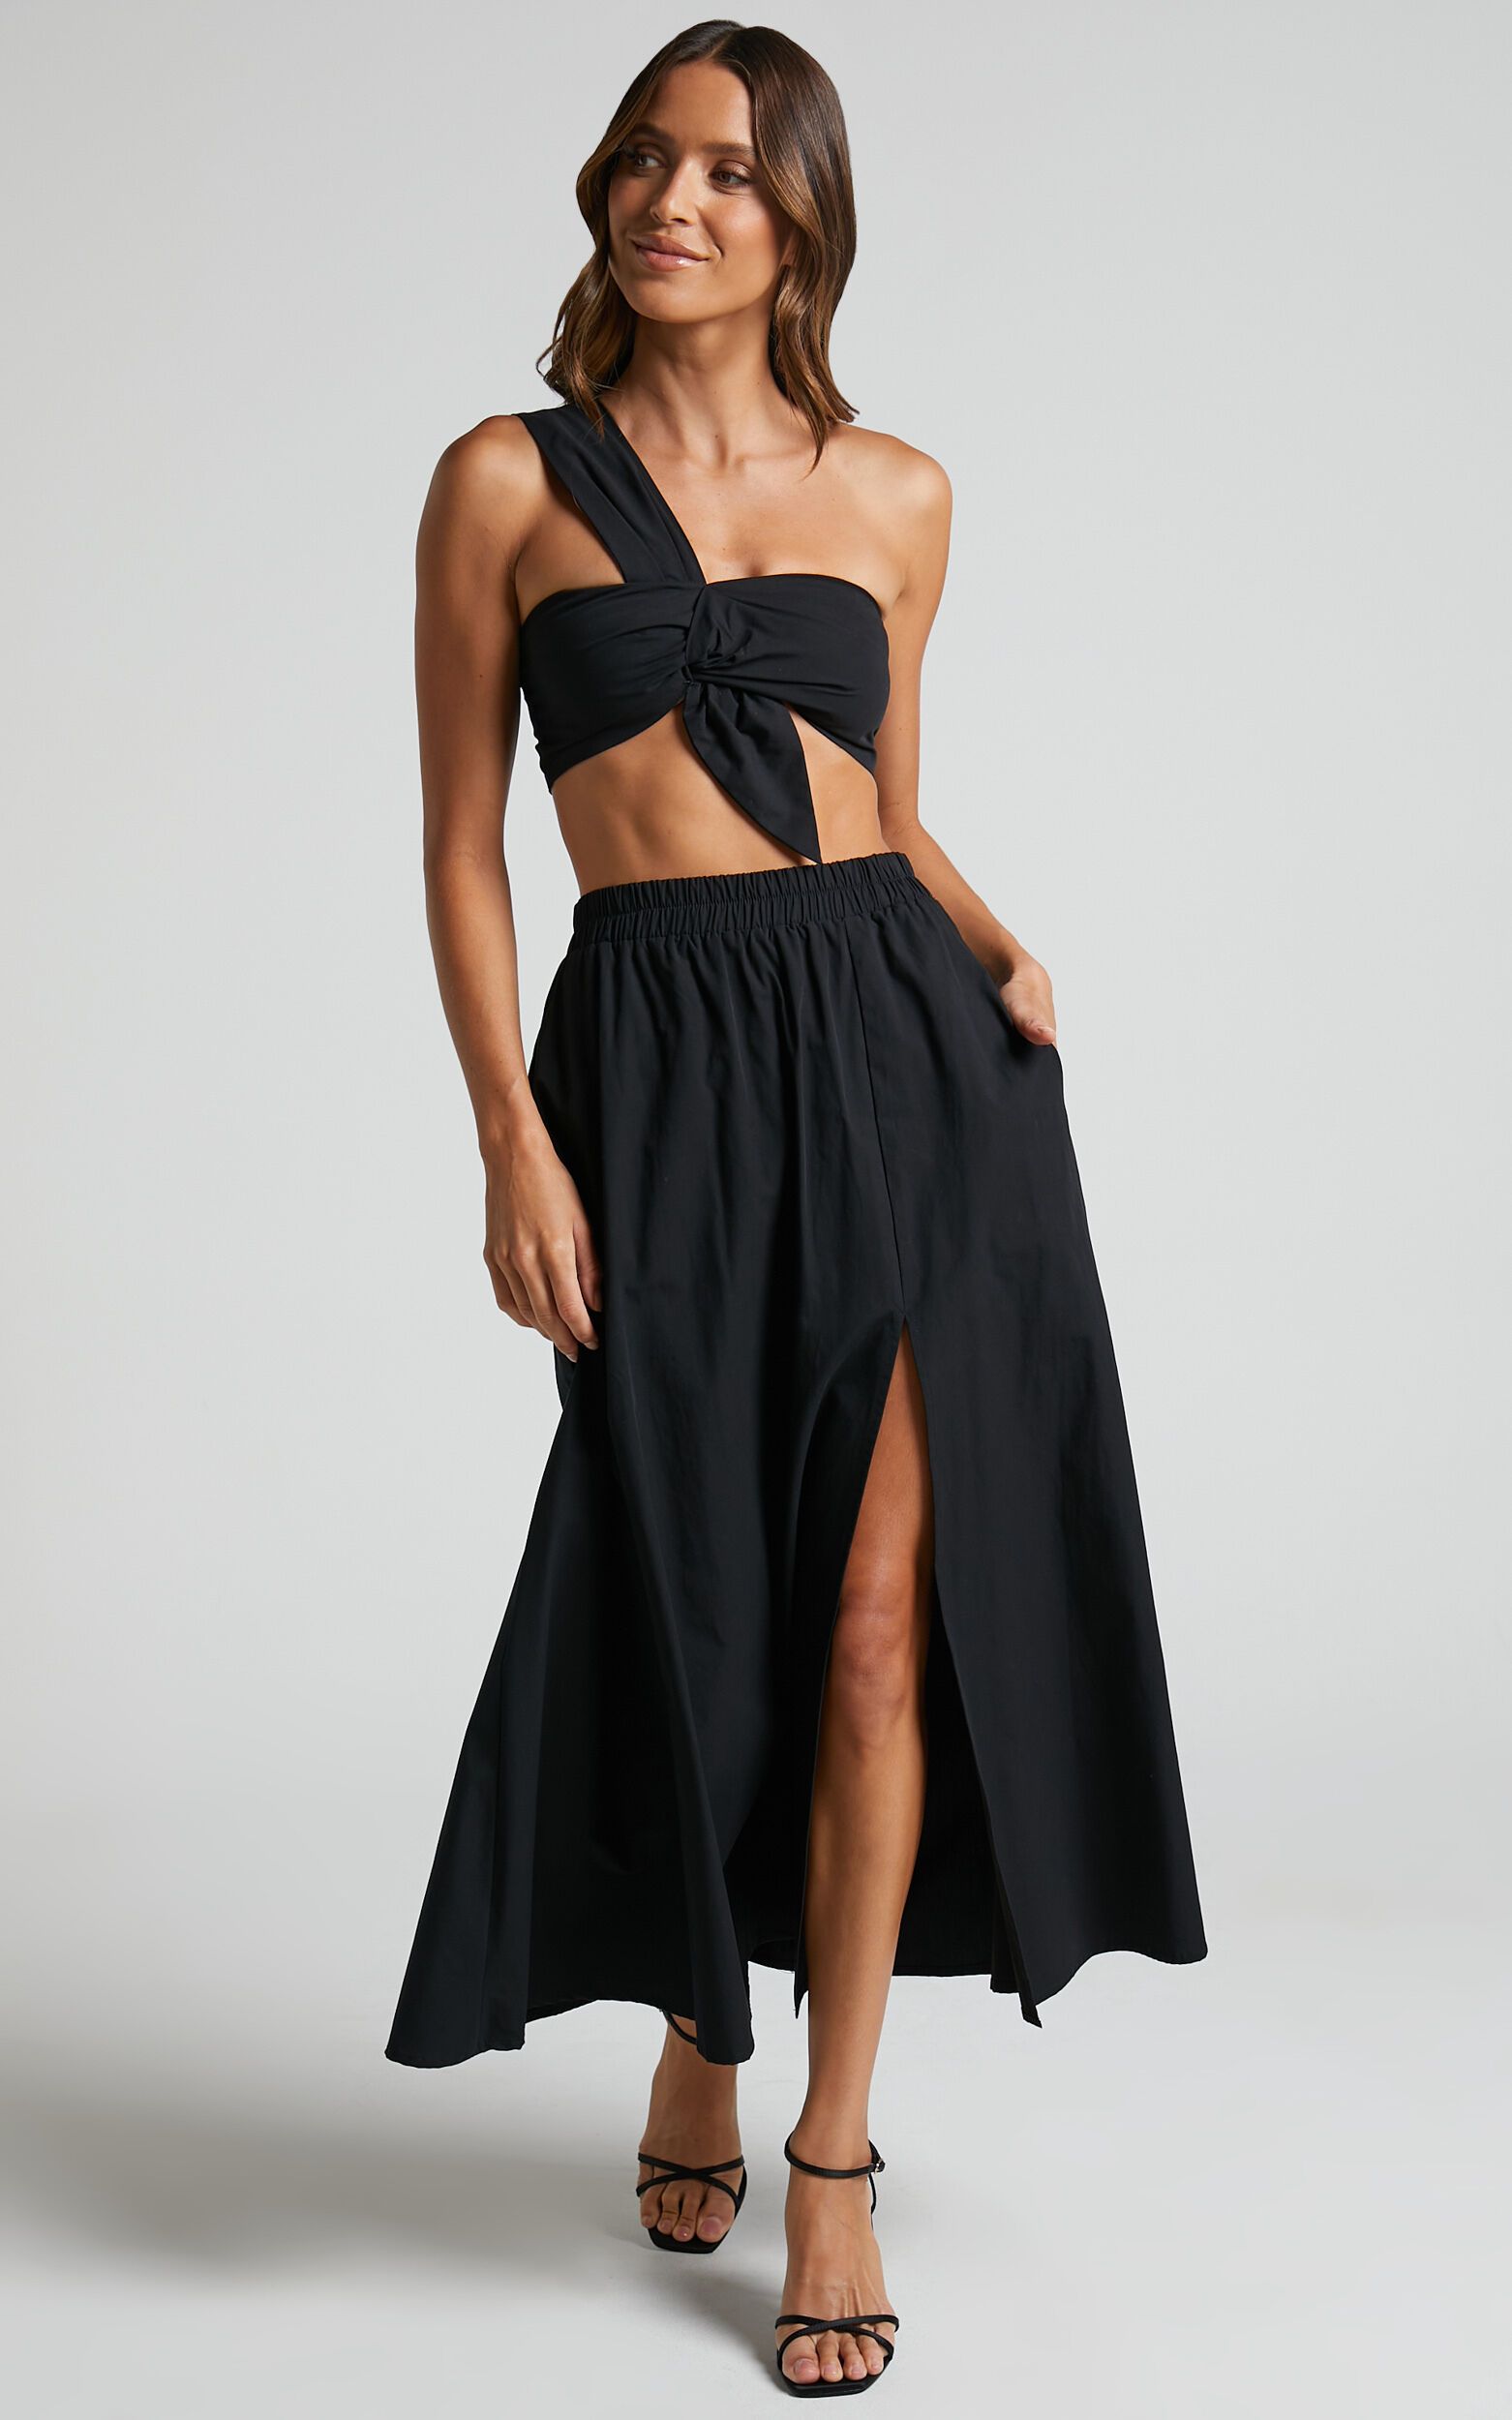 Sula Two Piece Set - One Shoulder Bralette Crop Top and Midi Skirt in Black | Showpo (US, UK & Europe)